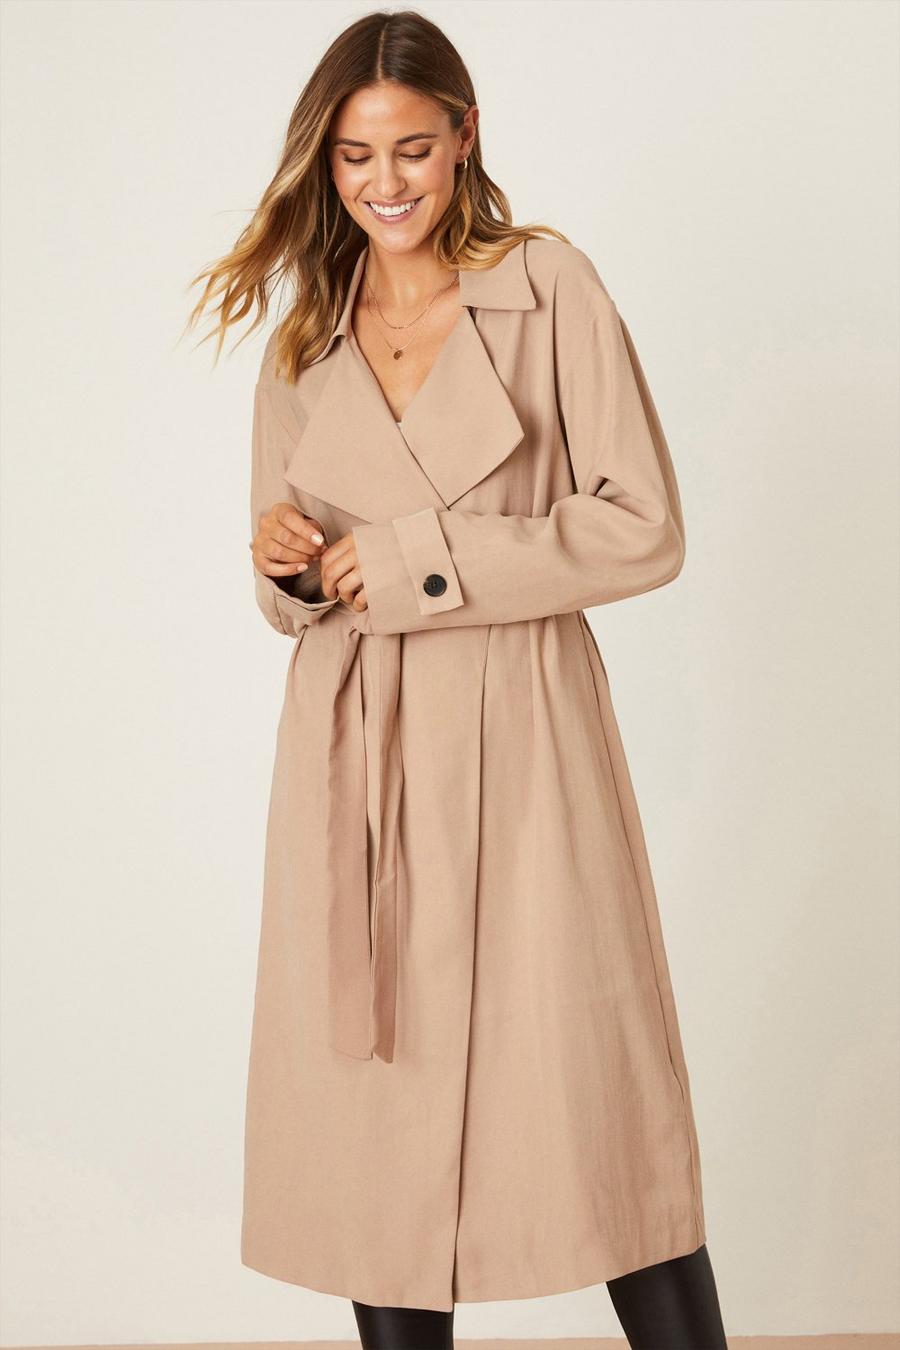 Long Duster Light Weight Trench Coat